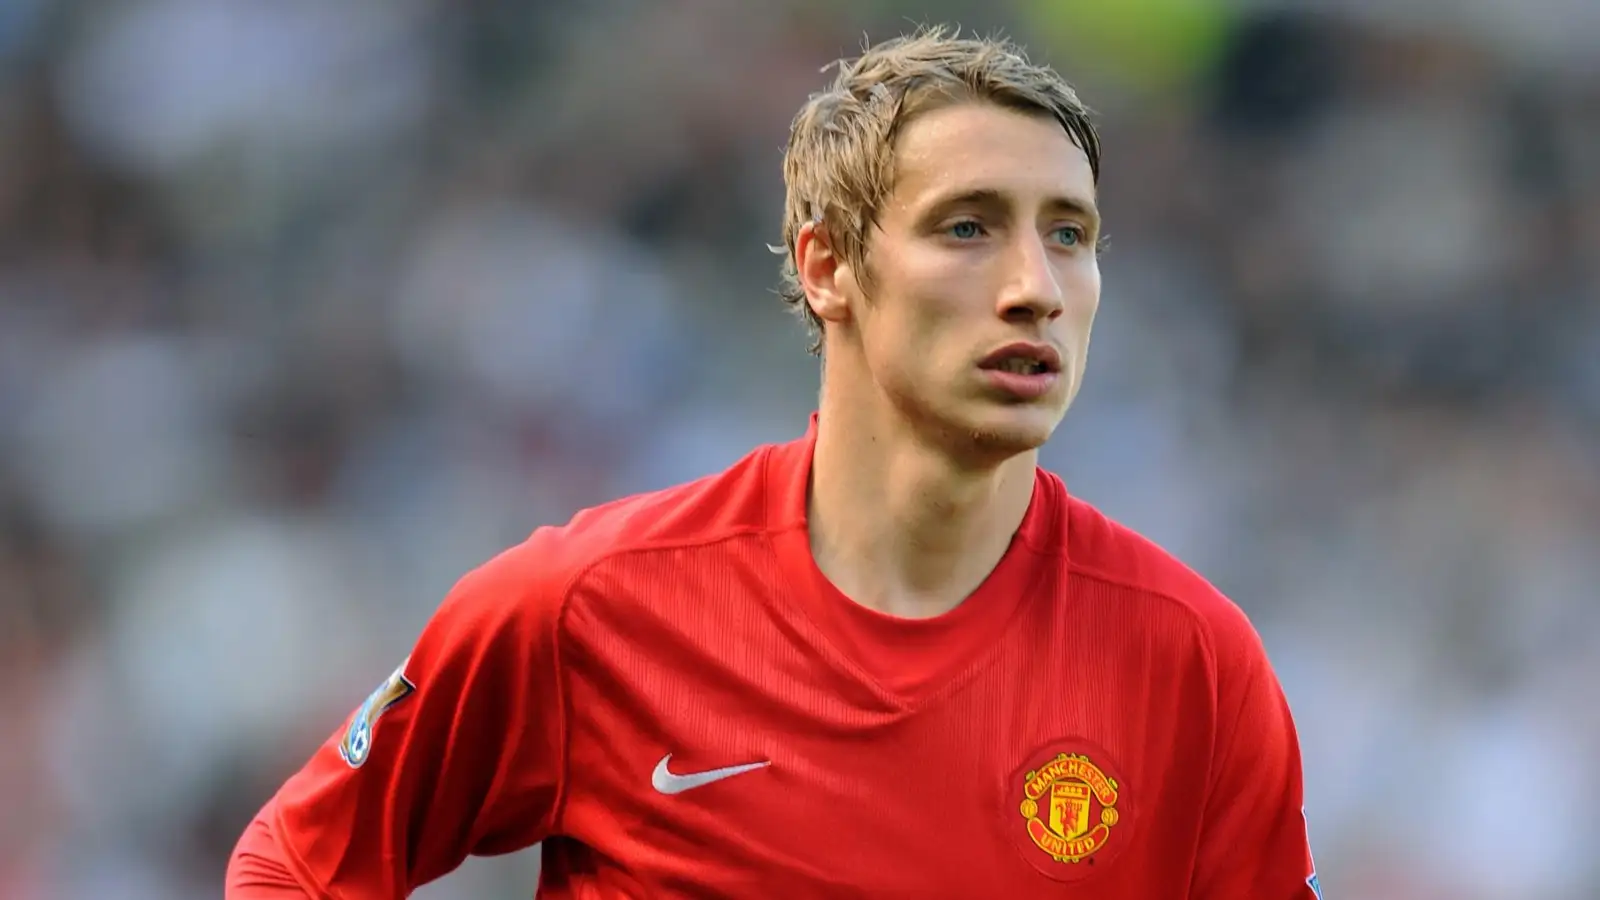 The story of the Man Utd starlet who was loaned out too often by Fergie